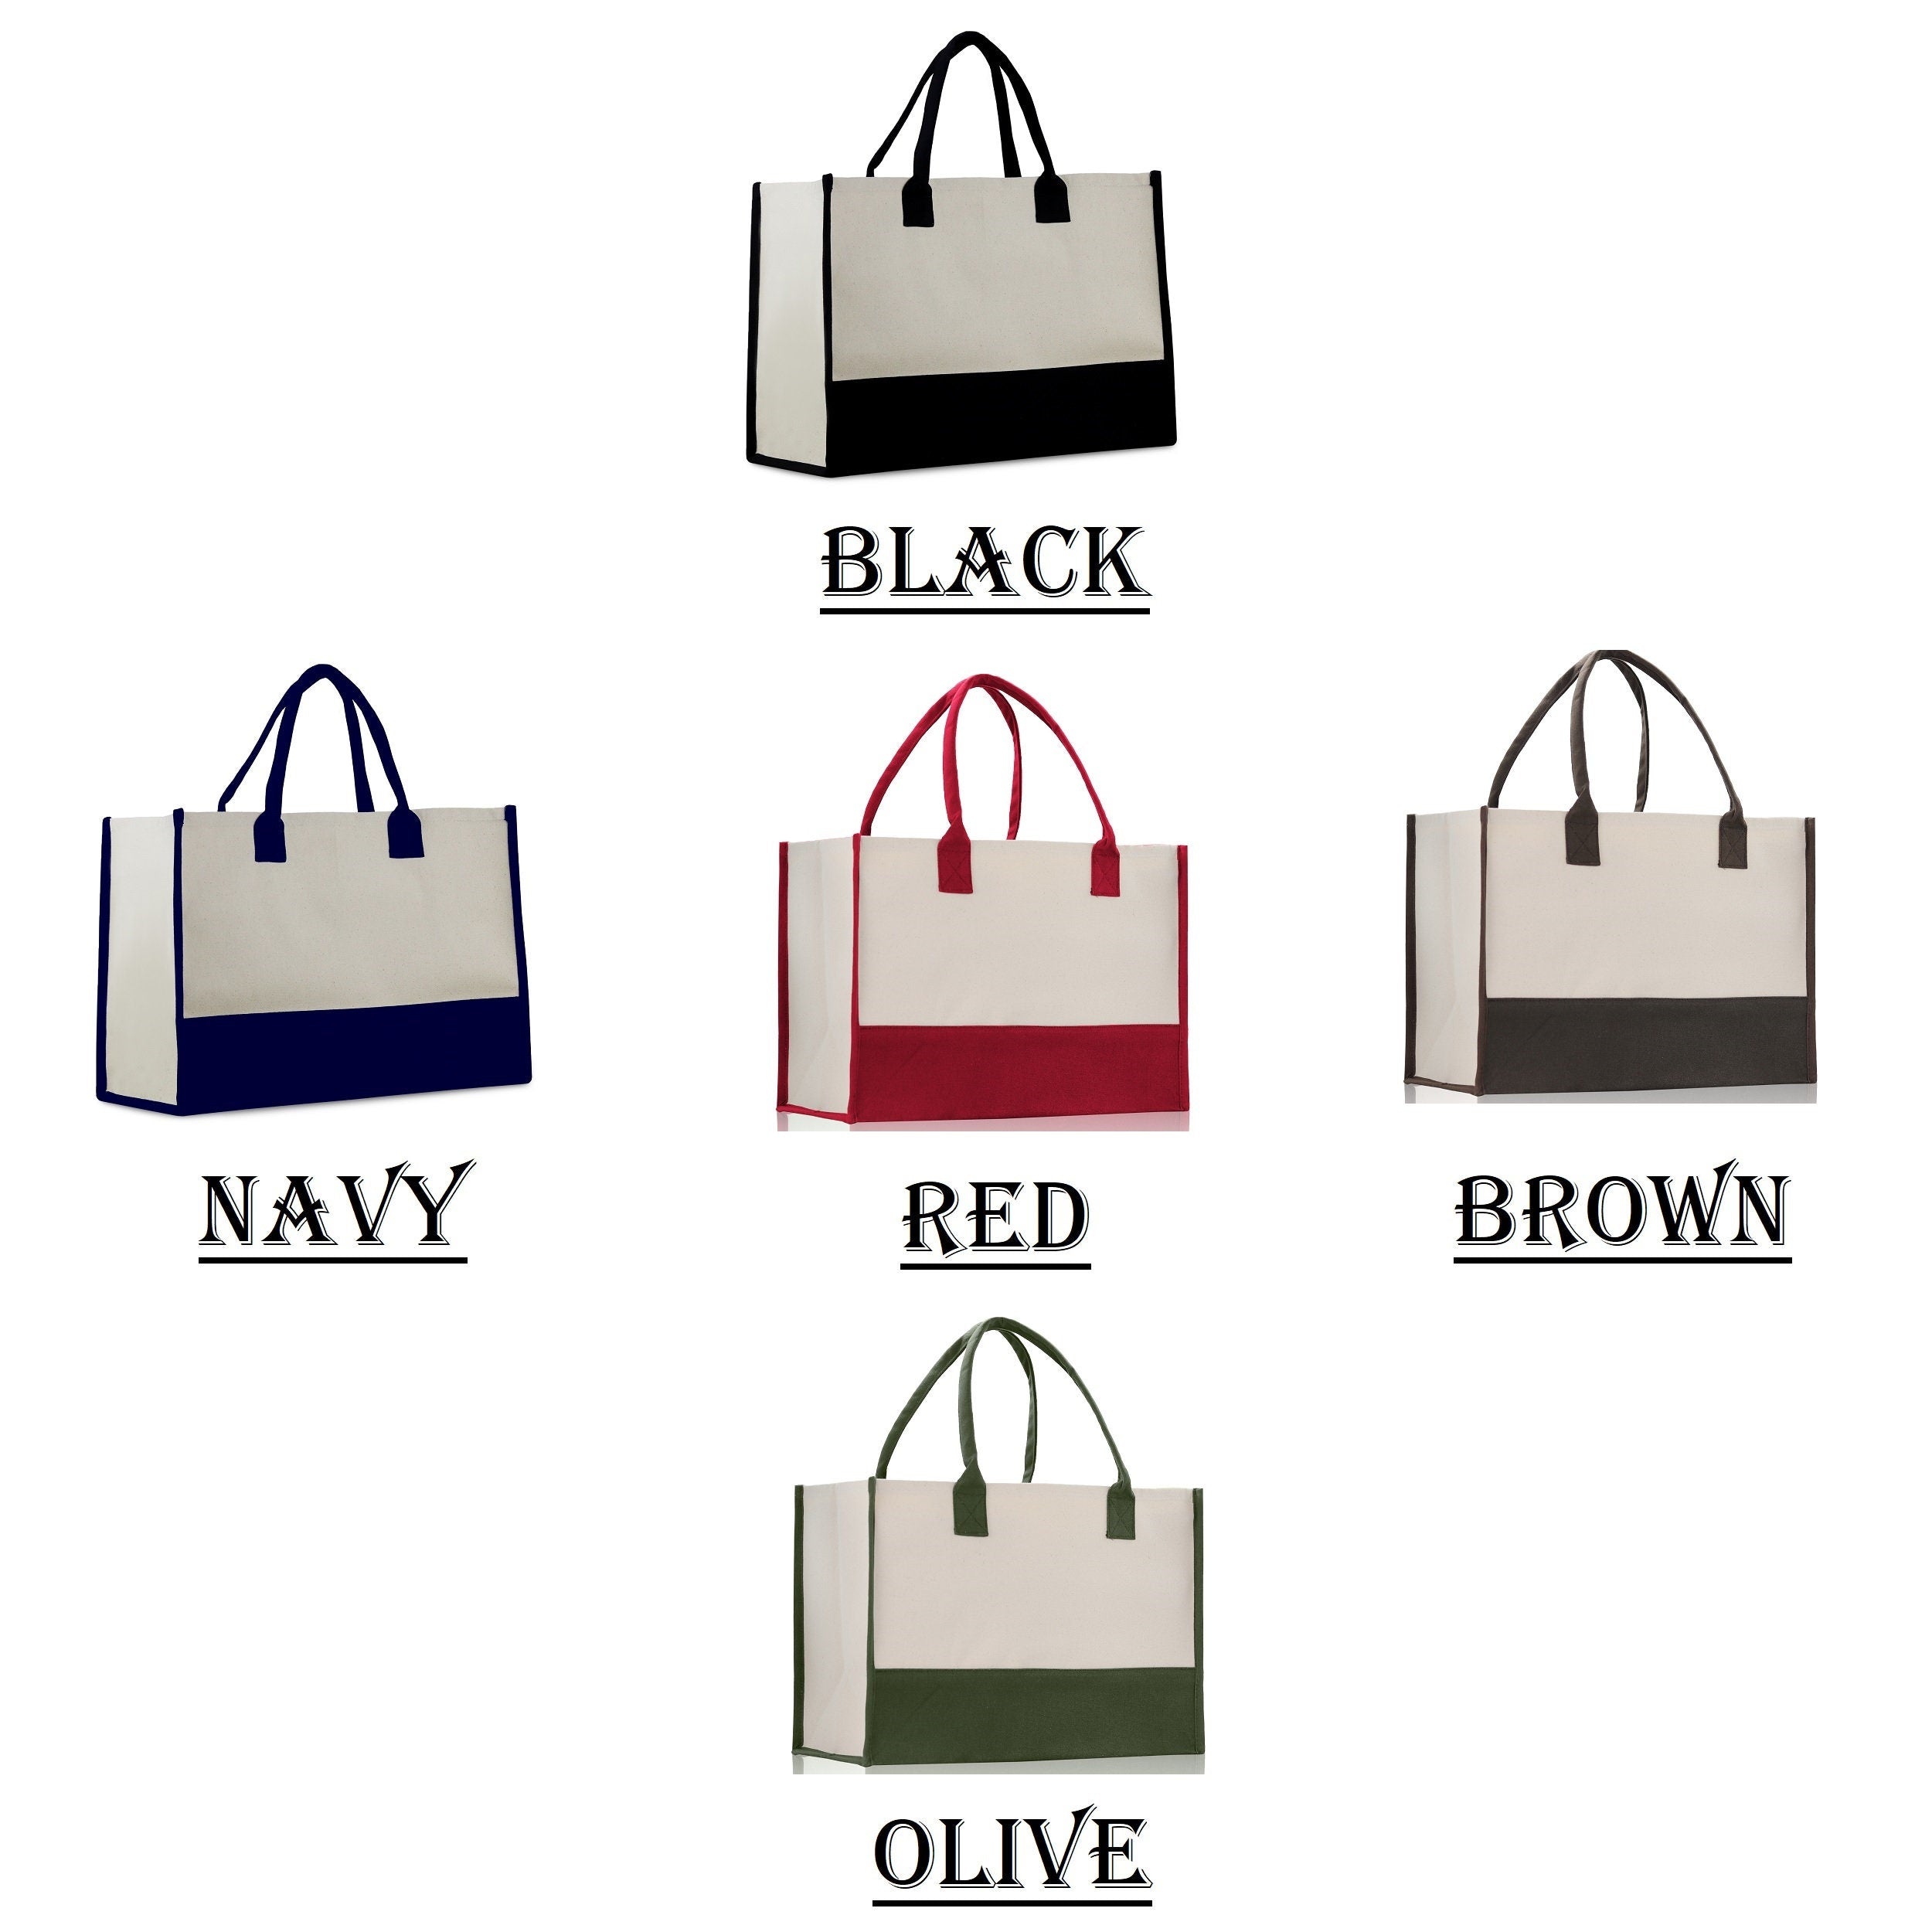 Customized Embroidered Name Tote Bag 100% Cotton Canvas and a Chic Personalized Tote Bag, Beach Bag, Market Bag, Bridesmaid Bag - Brown